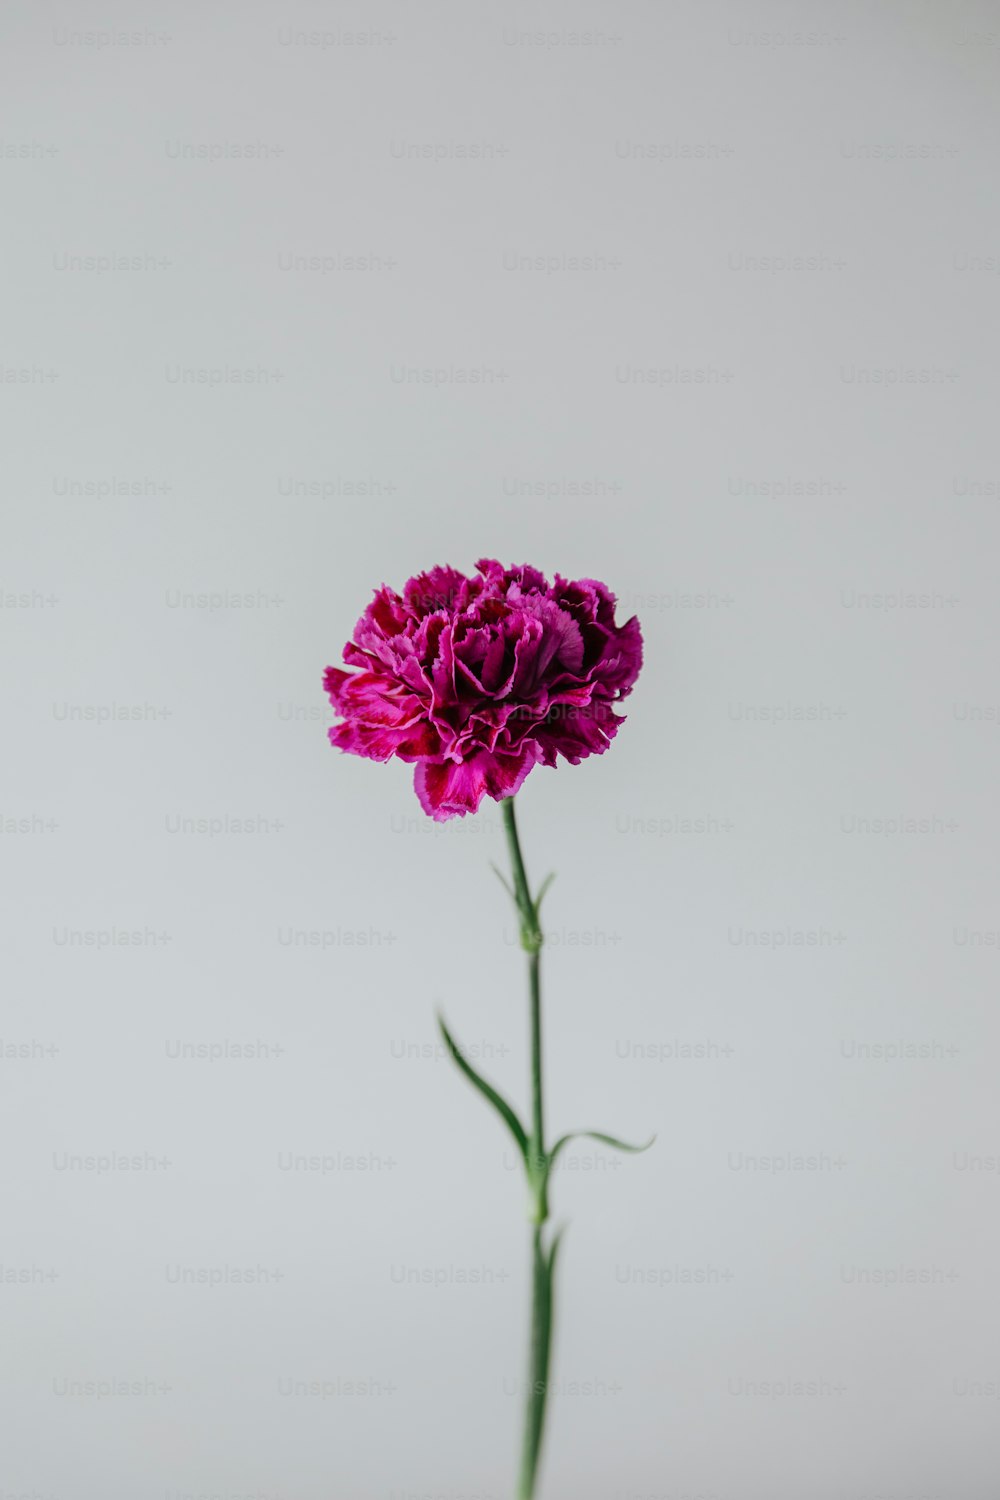 high quality images of flowers